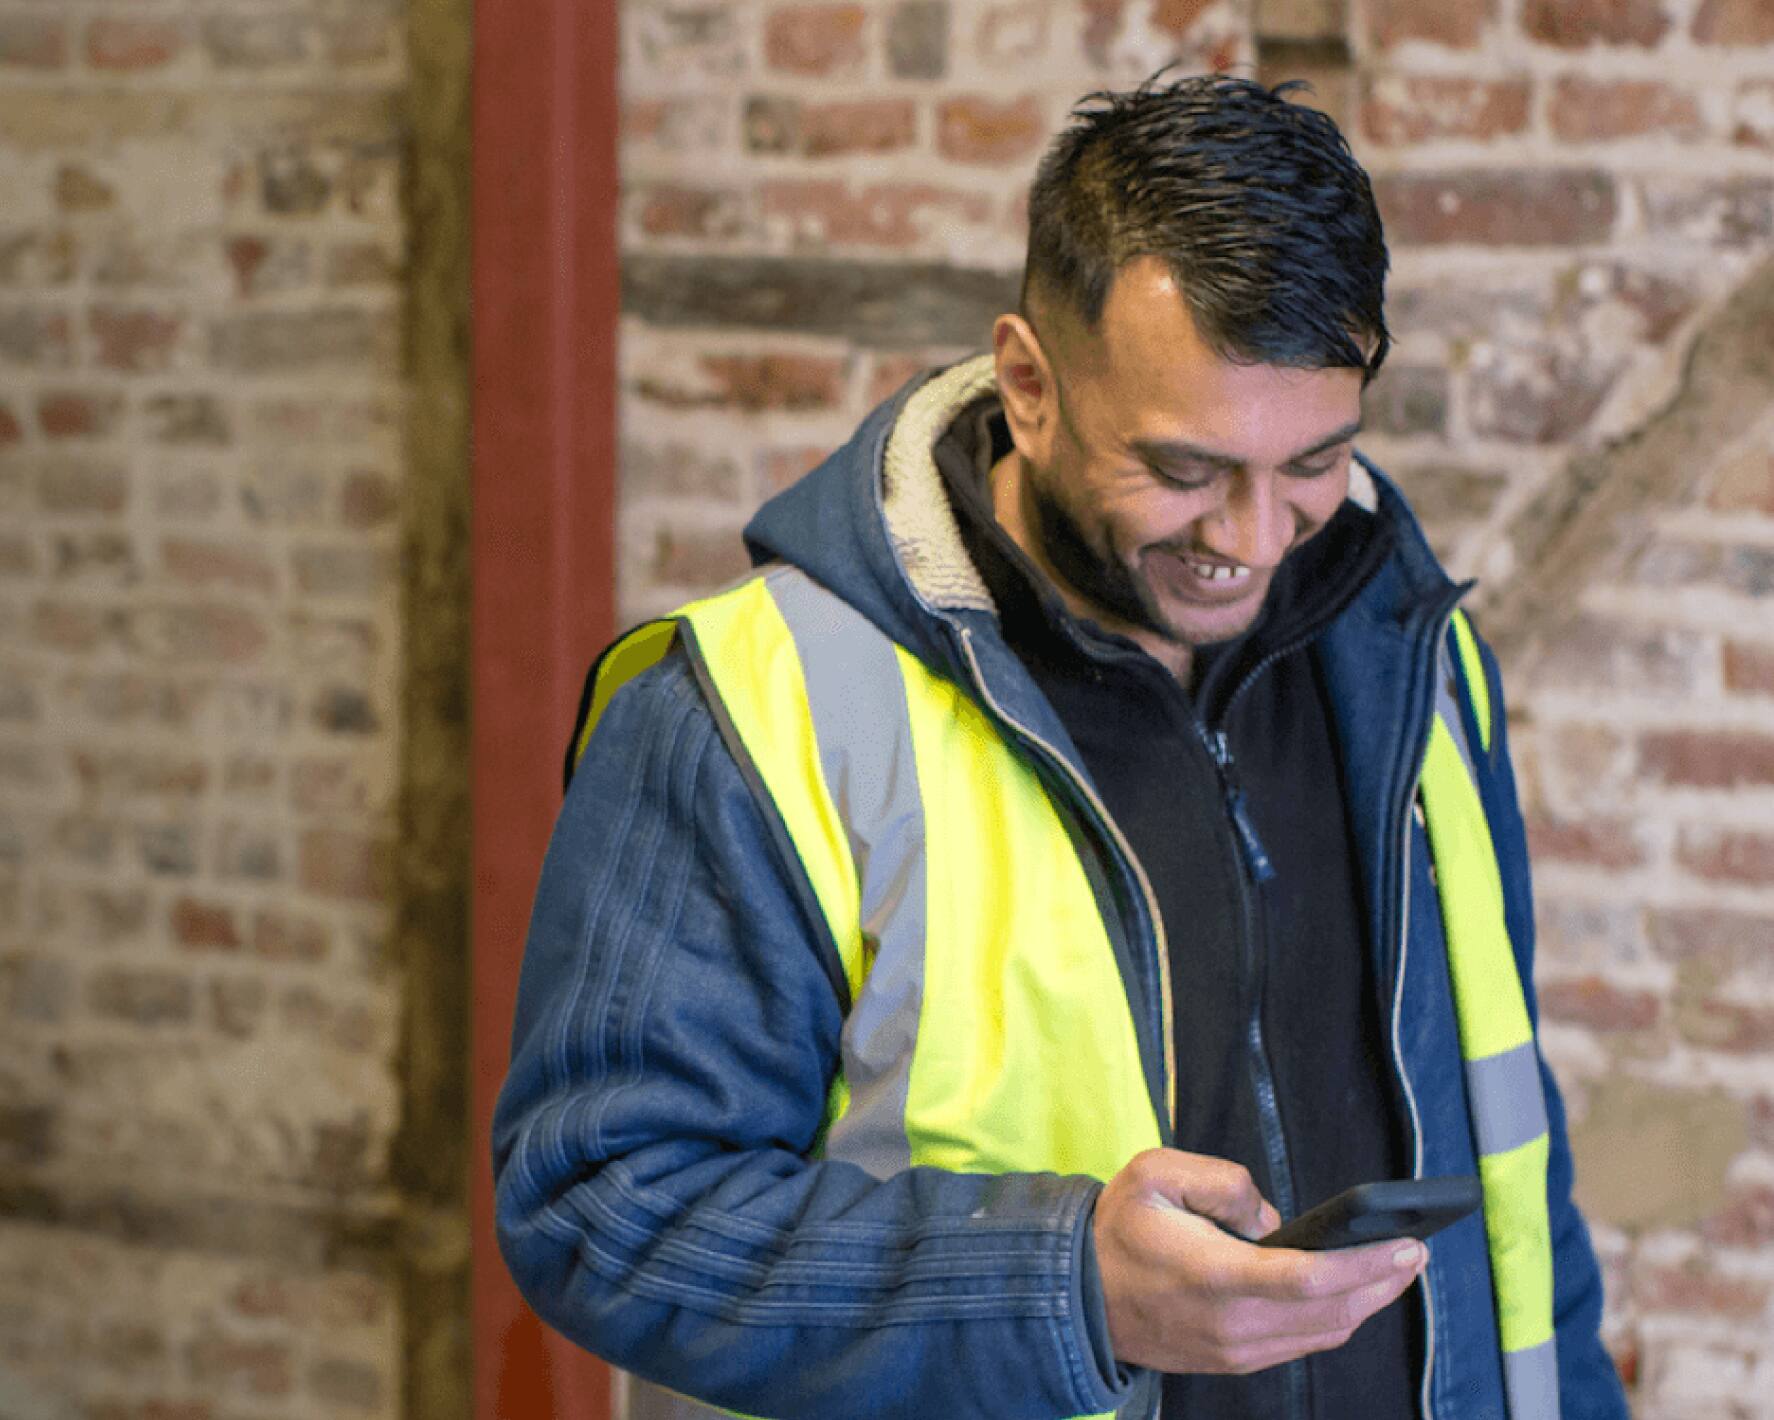 Hitesh, a construction worker who is wearing high-visibility clothing, uses construction Xero accounting software on his mobile.